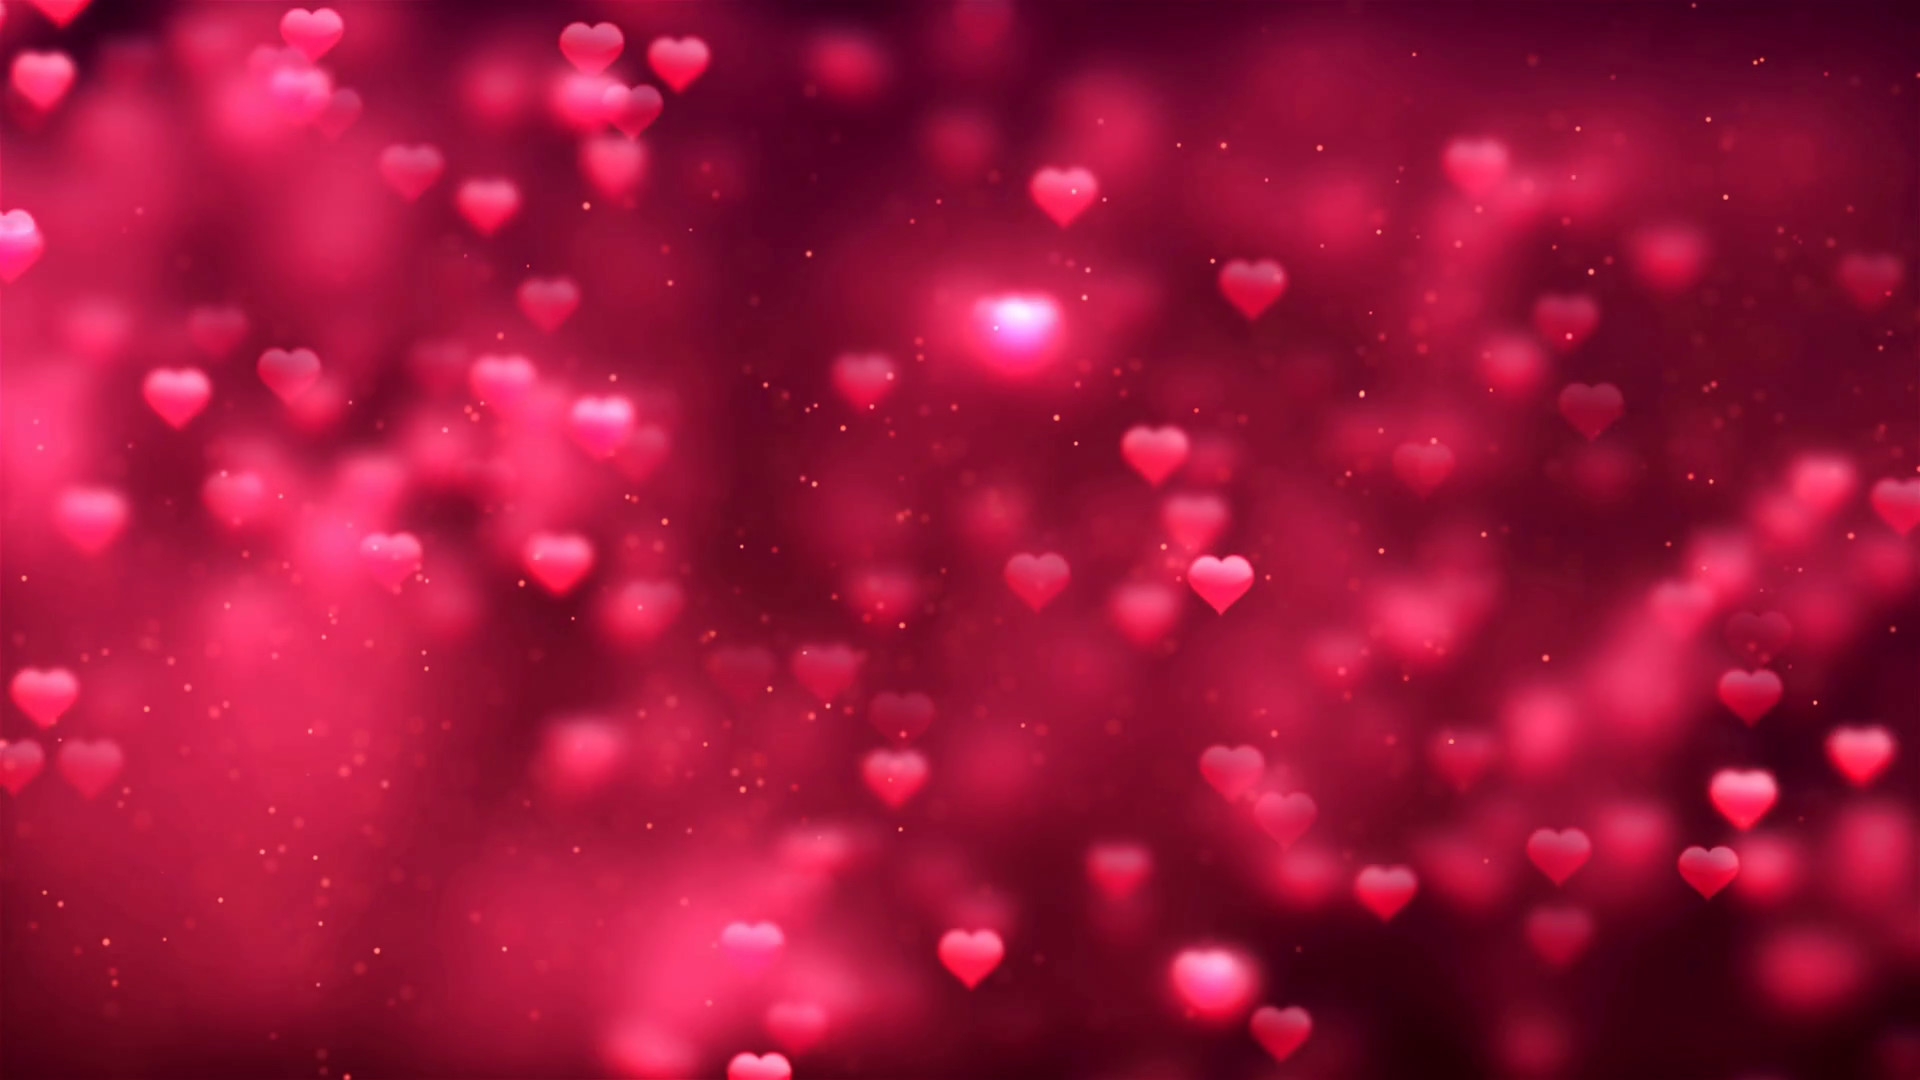 1920x1080 Red Love Heart Animation Particles Romantic Spinning Dangling Glowing Love  Hearts colored Particles Moving Loop Background For Valentines Day,  Mother's Day, ...